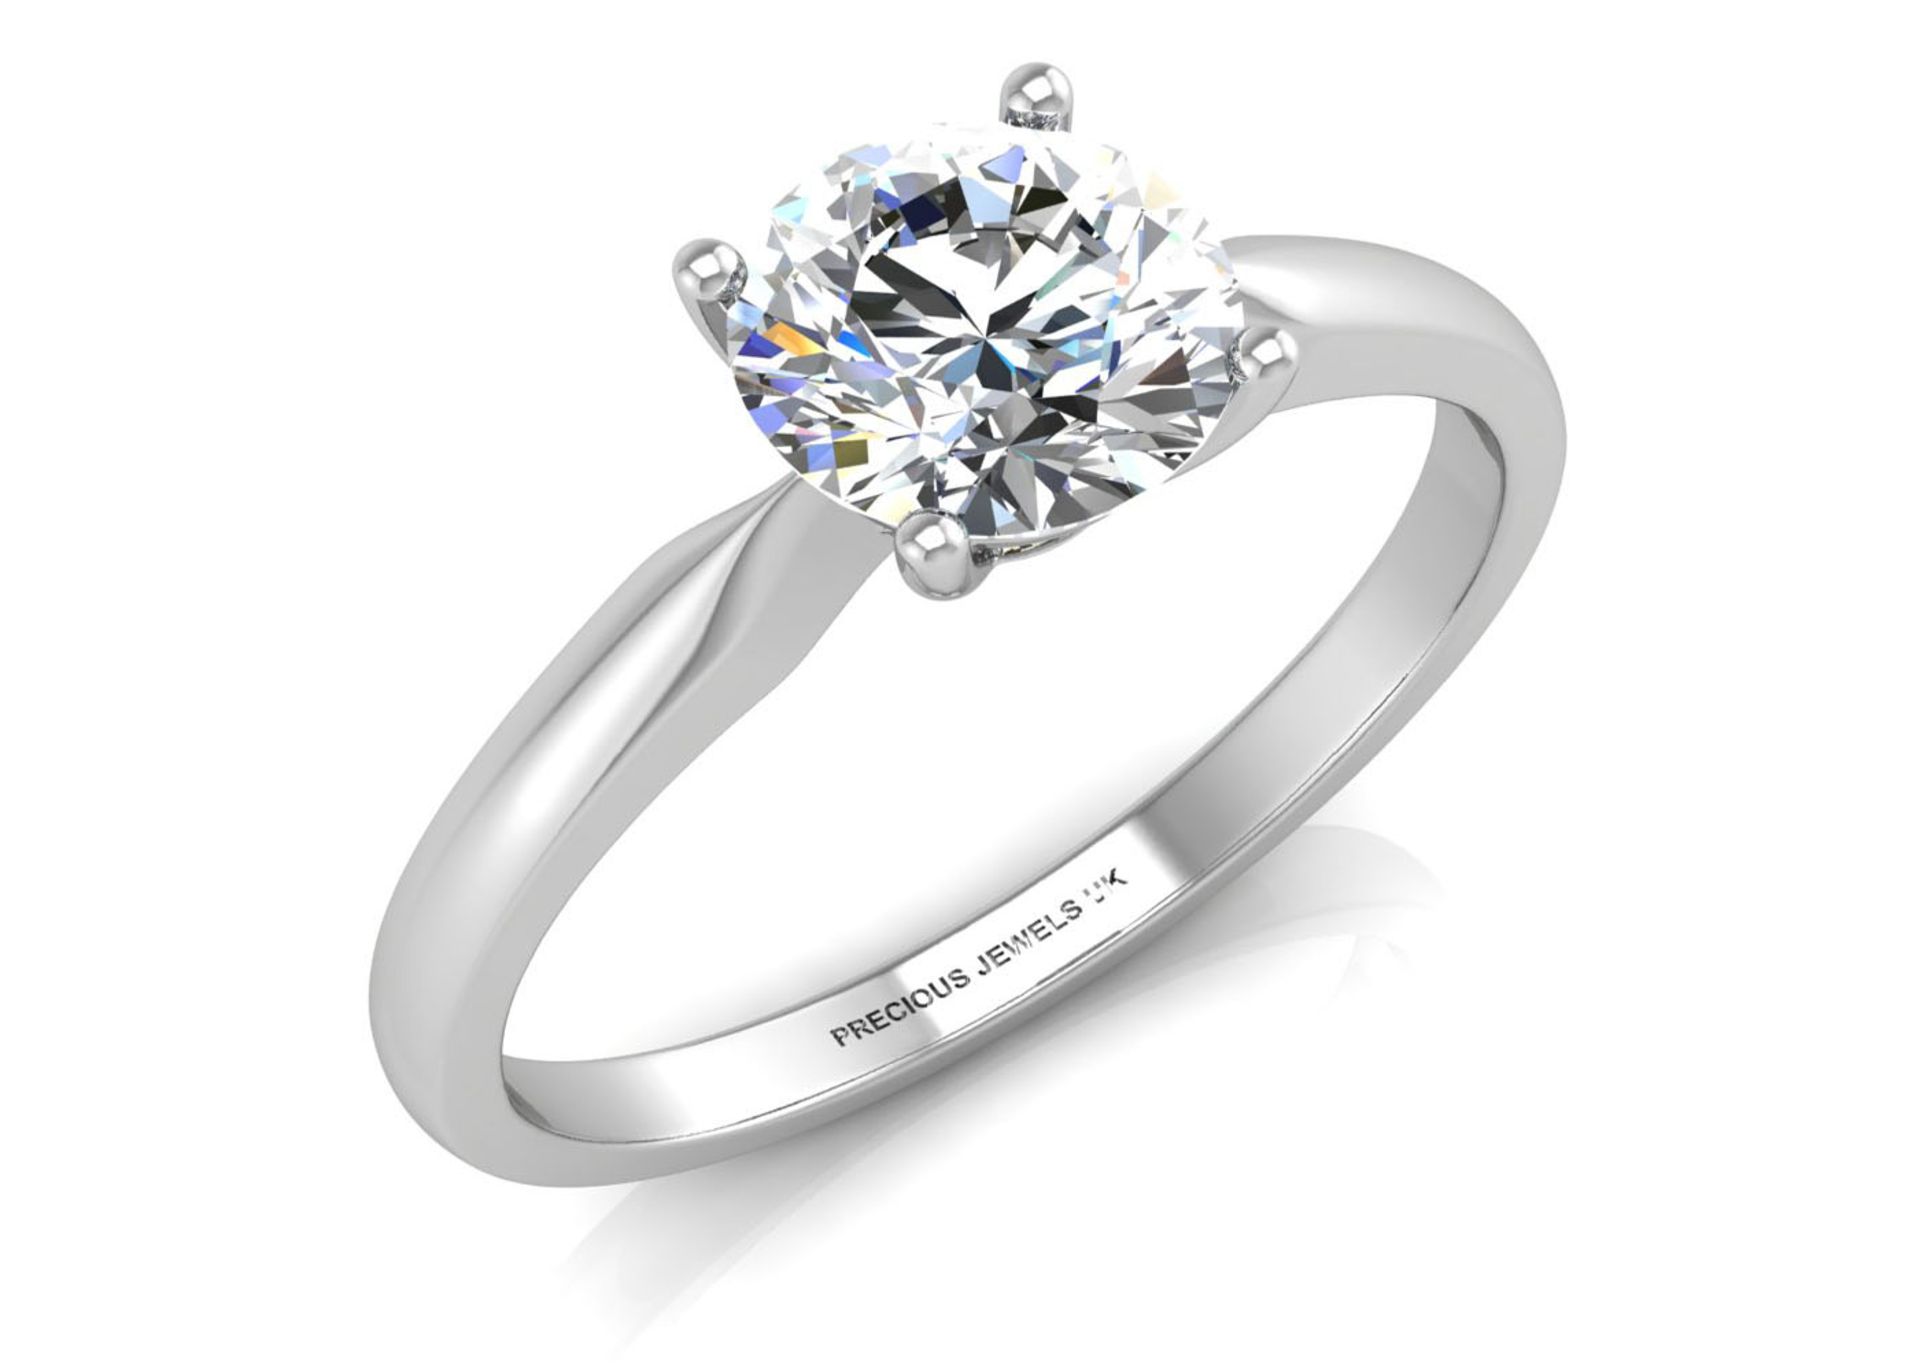 18ct White Gold Single Stone Diamond Engagement Ring 0.55 Carats - Valued by AGI £8,955.00 - A